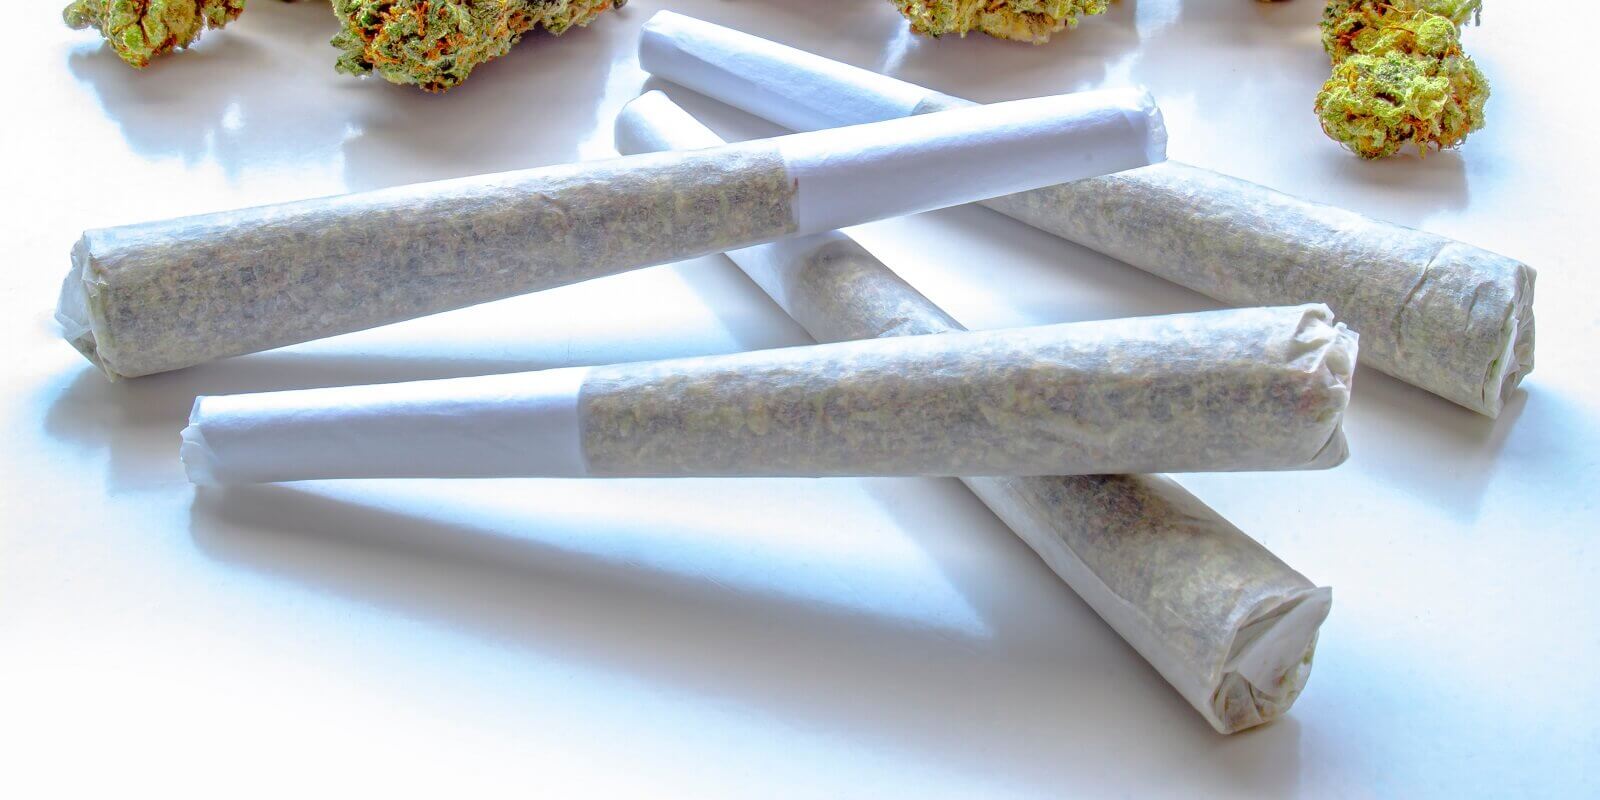 several pre-rolls of medicinal cannabis on a white surface with flower cannabis in Boston, MA